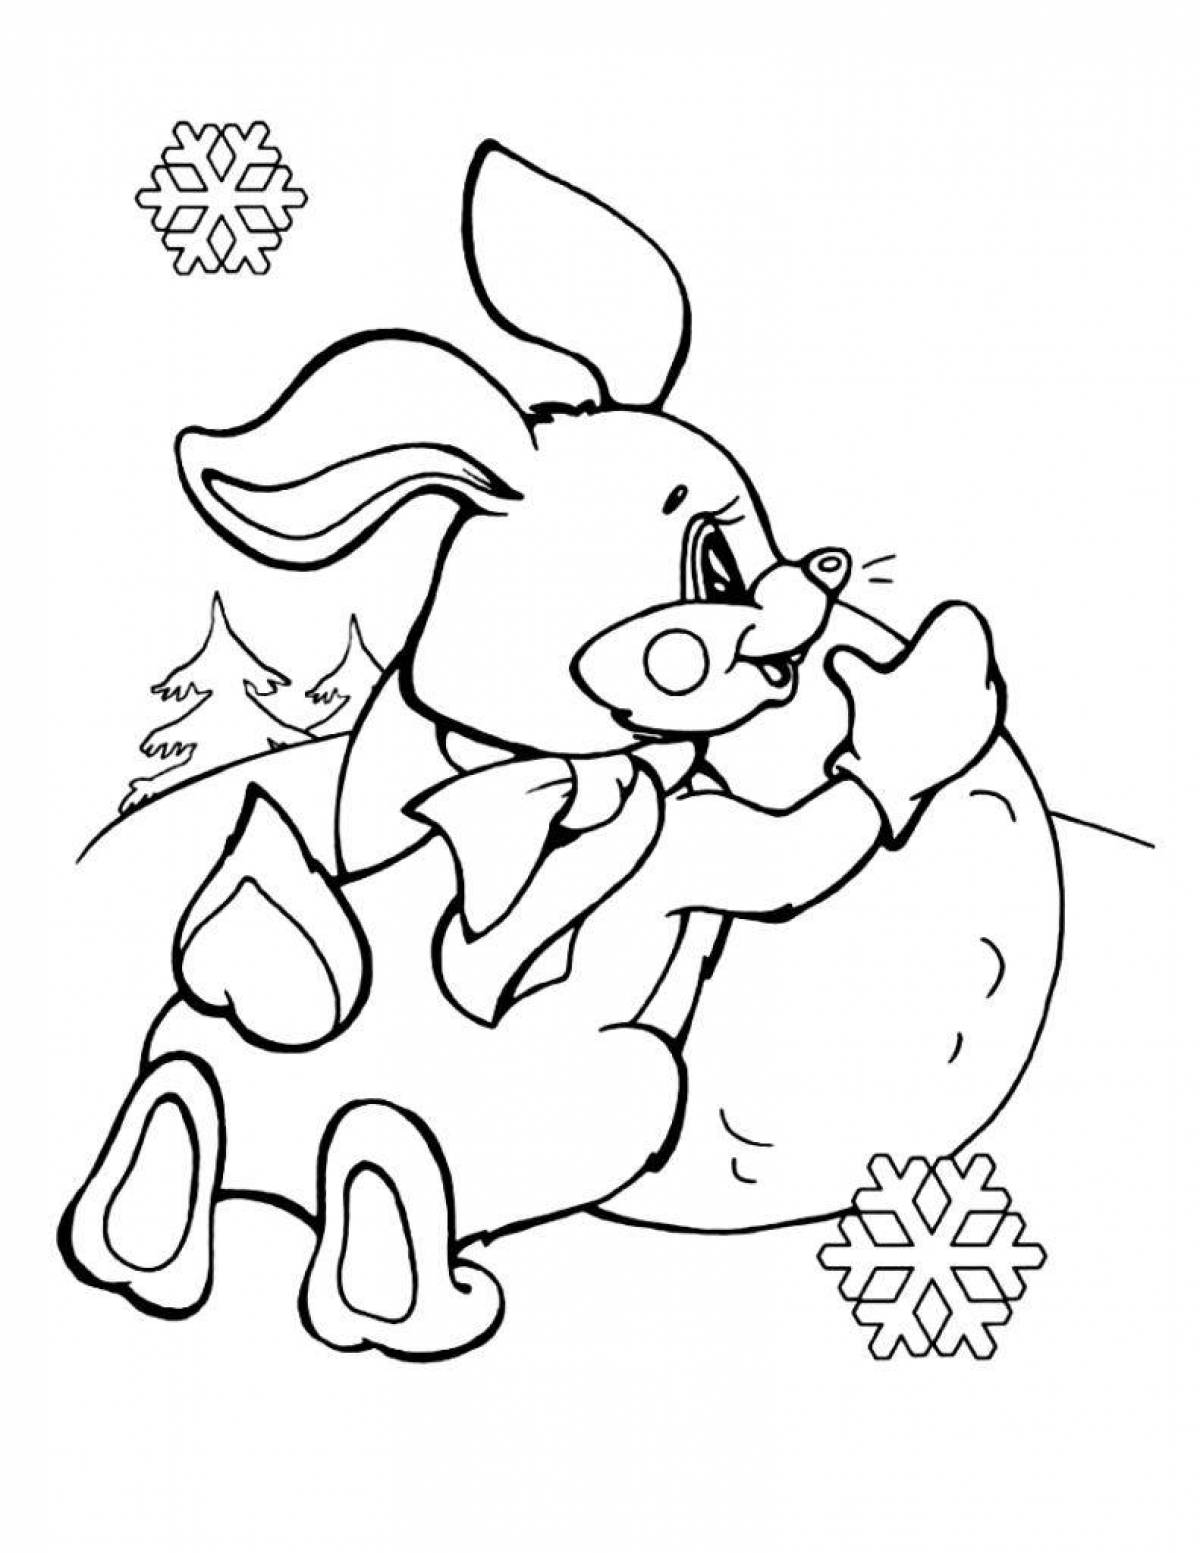 Coloring page delightful year of the hare